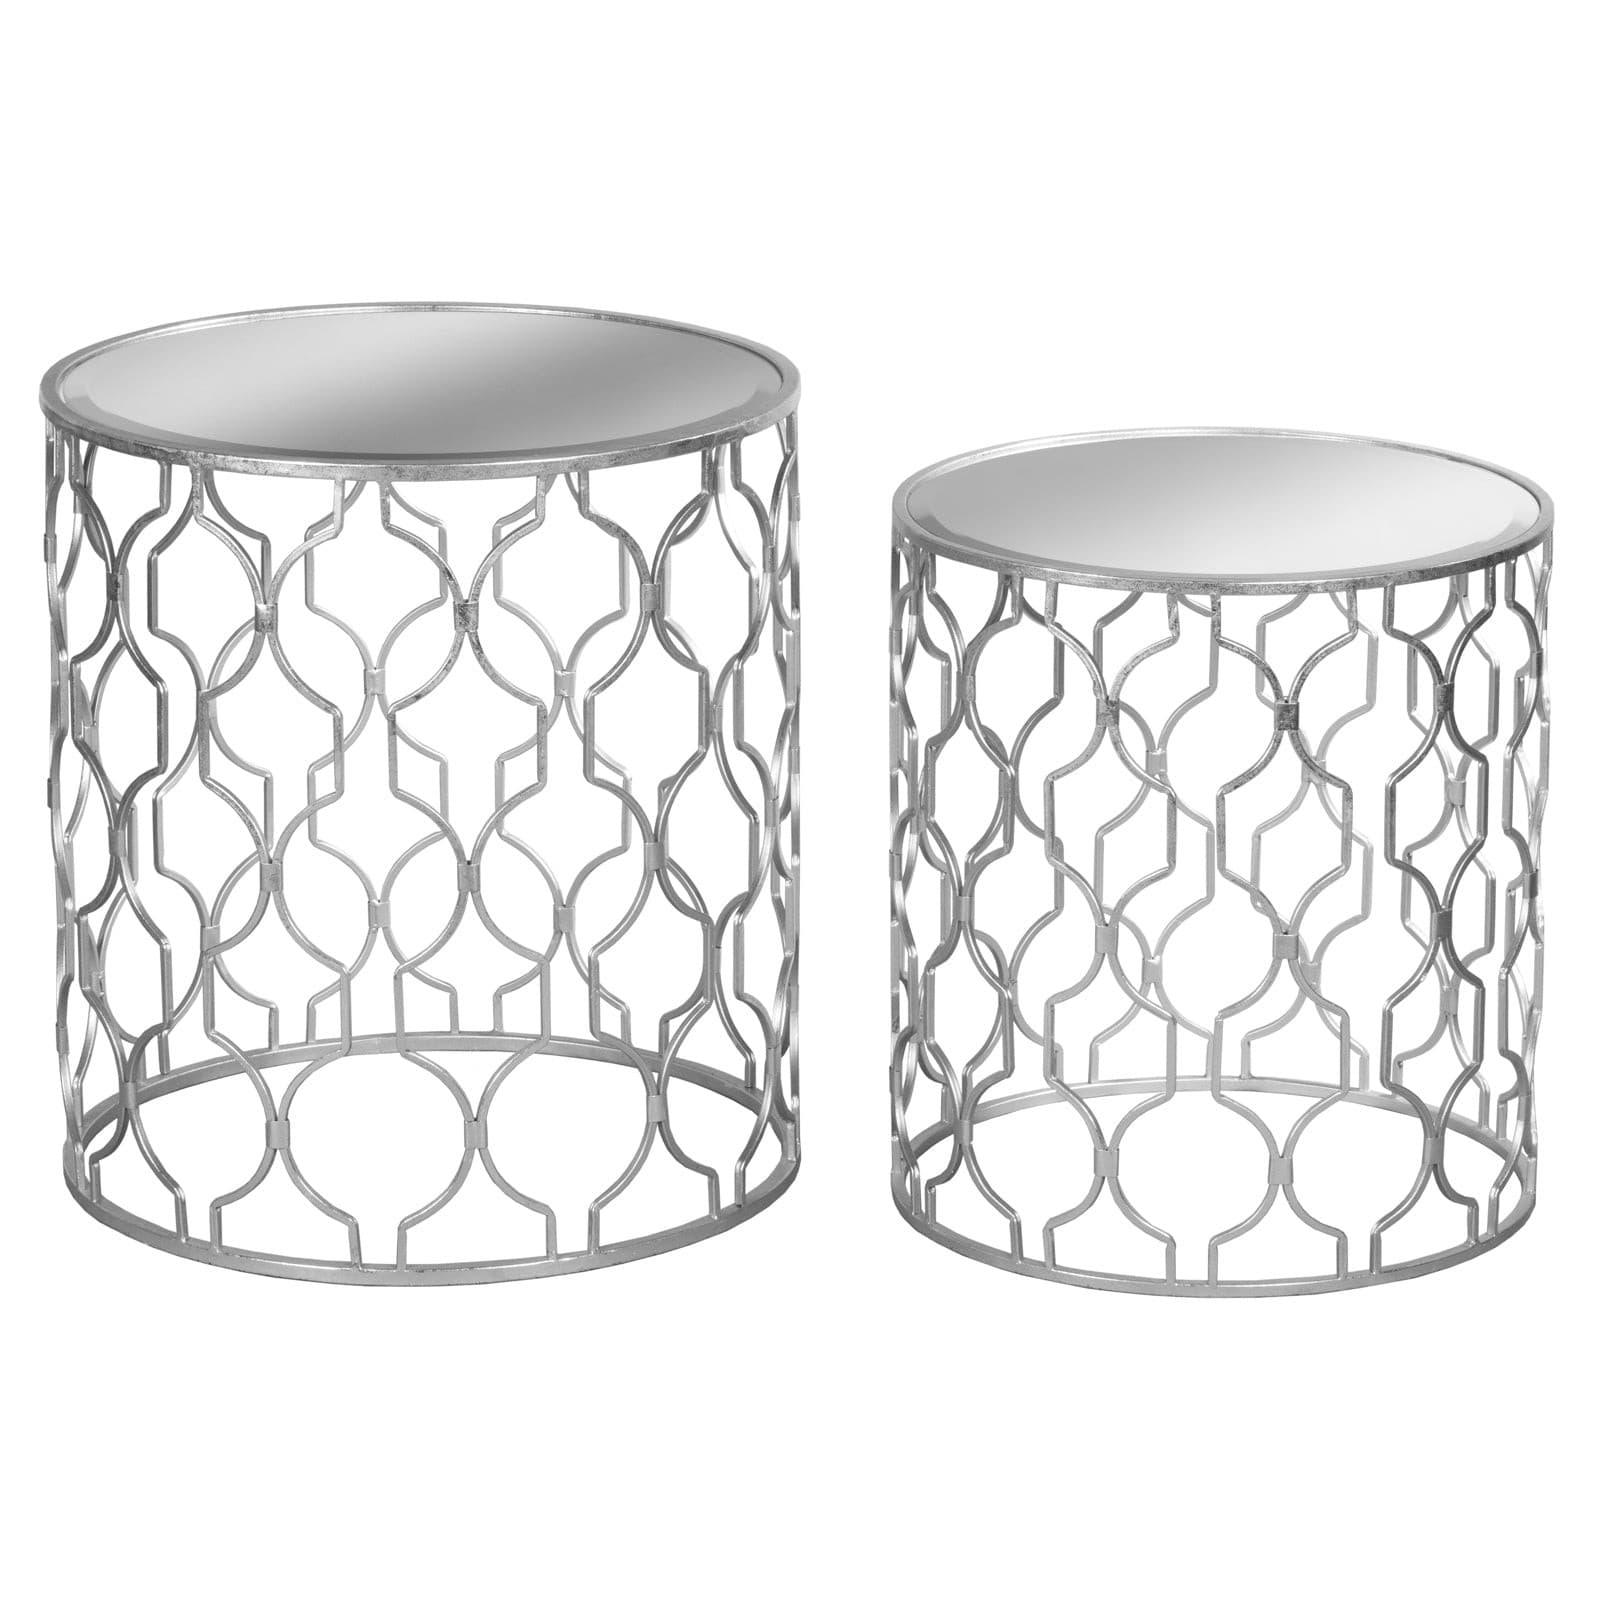 Set of Two Arabesque Silver Foil Mirrored Side Tables - Vookoo Lifestyle